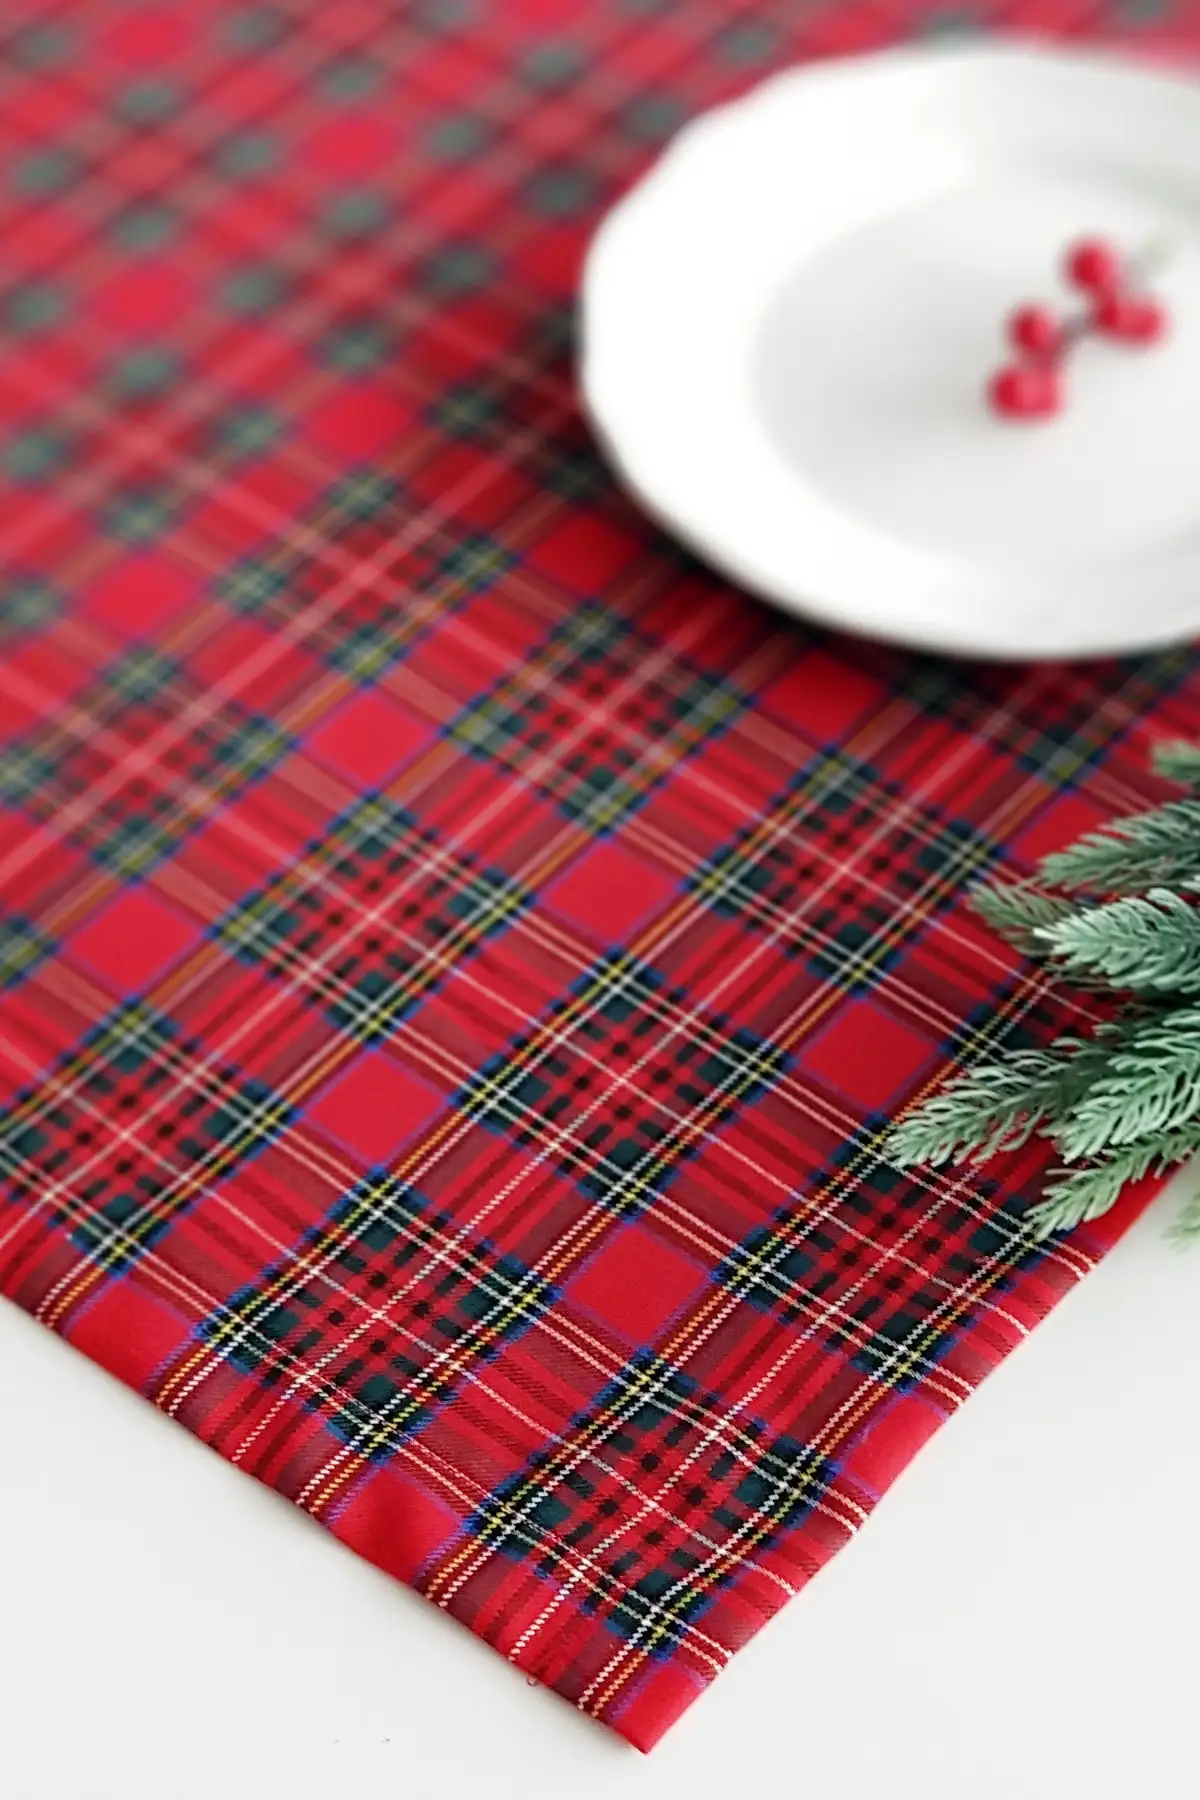 Red/Green Tartan Plaid Christmas Tablecloth, 140*240 Cm. Royal Stewart Plaid,  Holiday Table Linens, Scottish Burns Night Supper Long Stylish Dining Table  For Special Occasions Gift Extra Long, Wrinkle Resistant Fabric - AliExpress